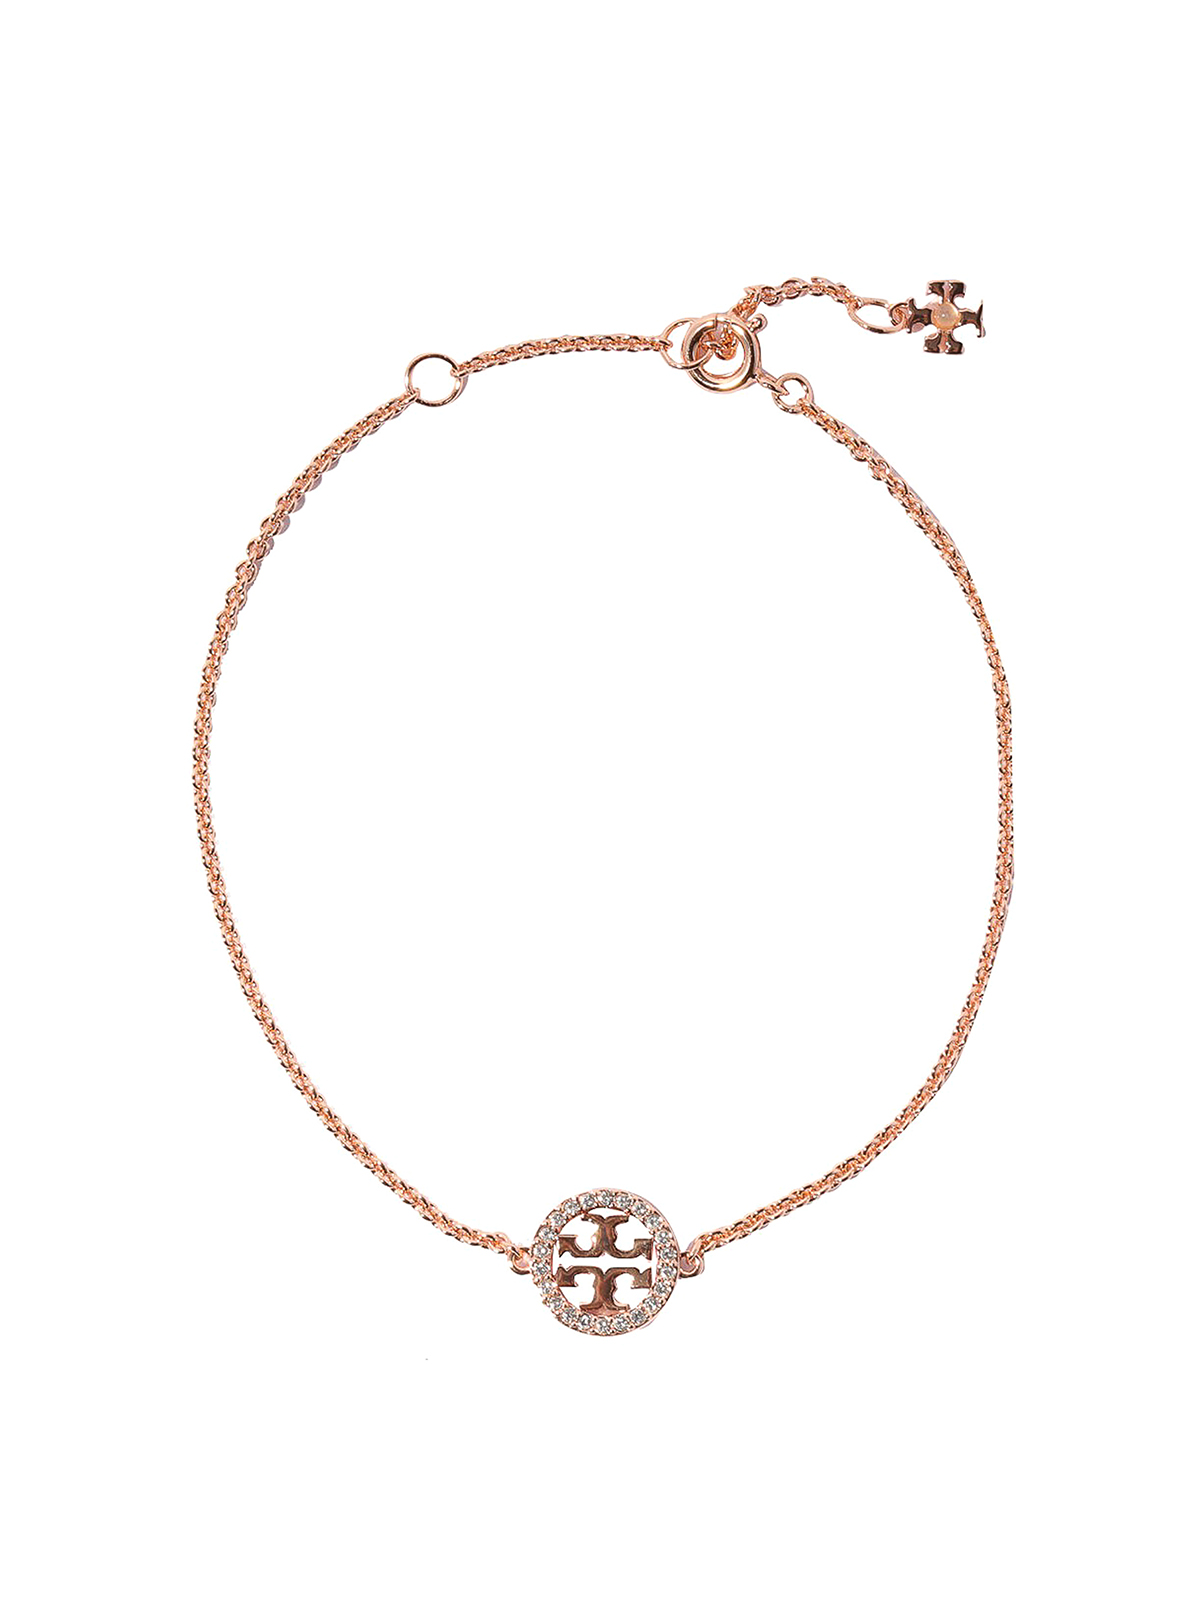 Necklaces & Chokers Tory Burch - Gold tone necklace with charm and crystals  - 80997696